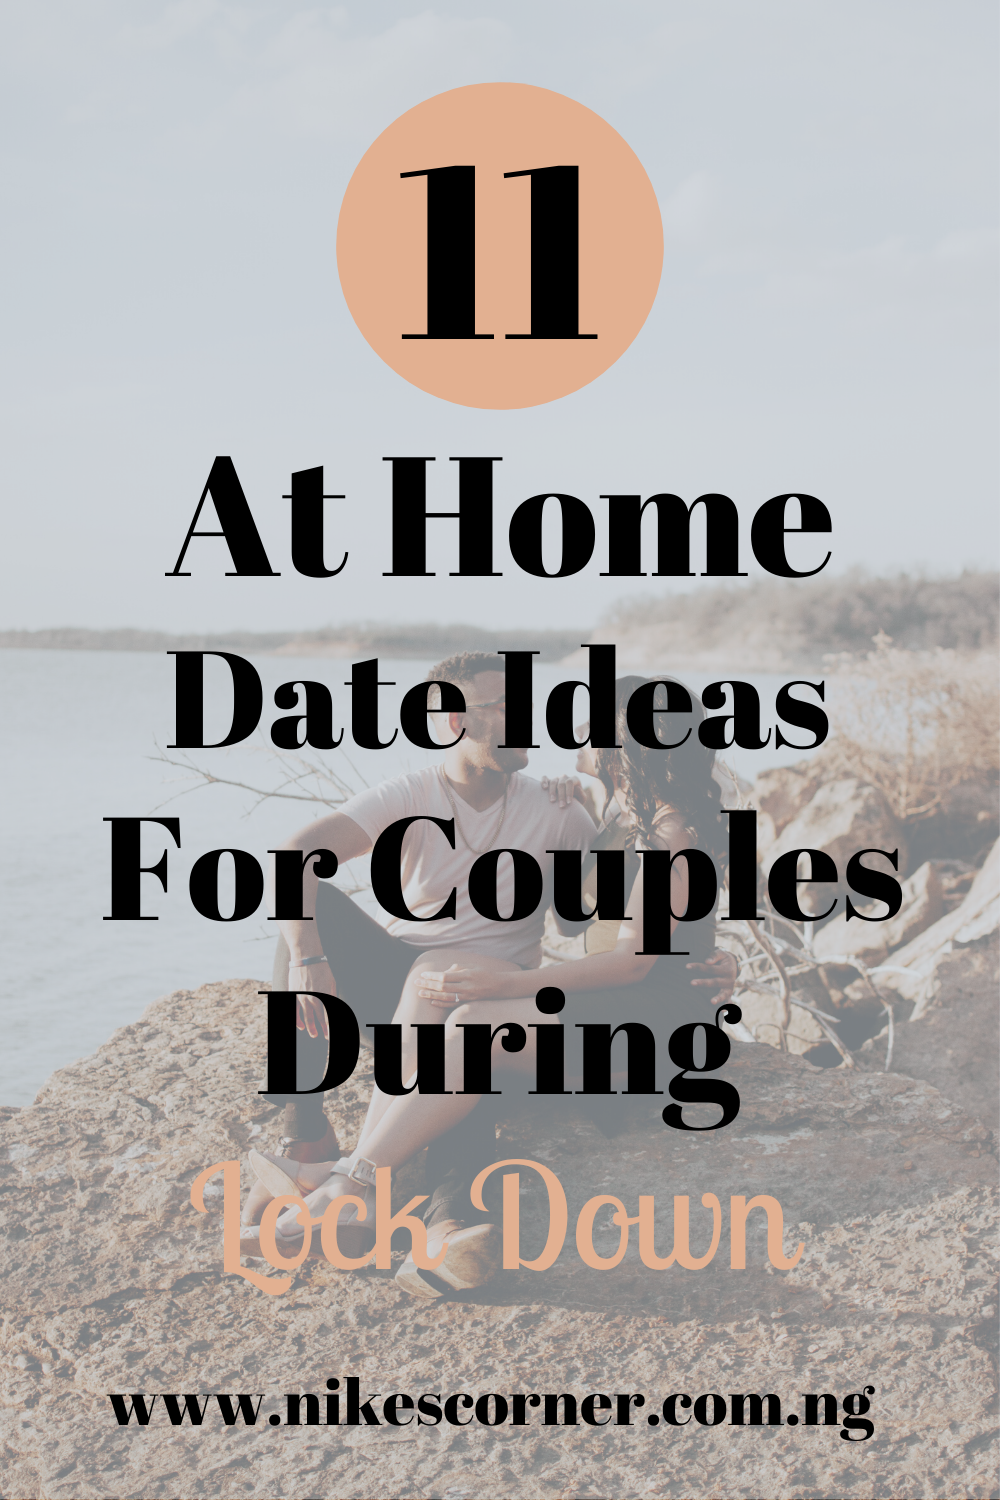 At Home Date Ideas For Couples During Lock Down